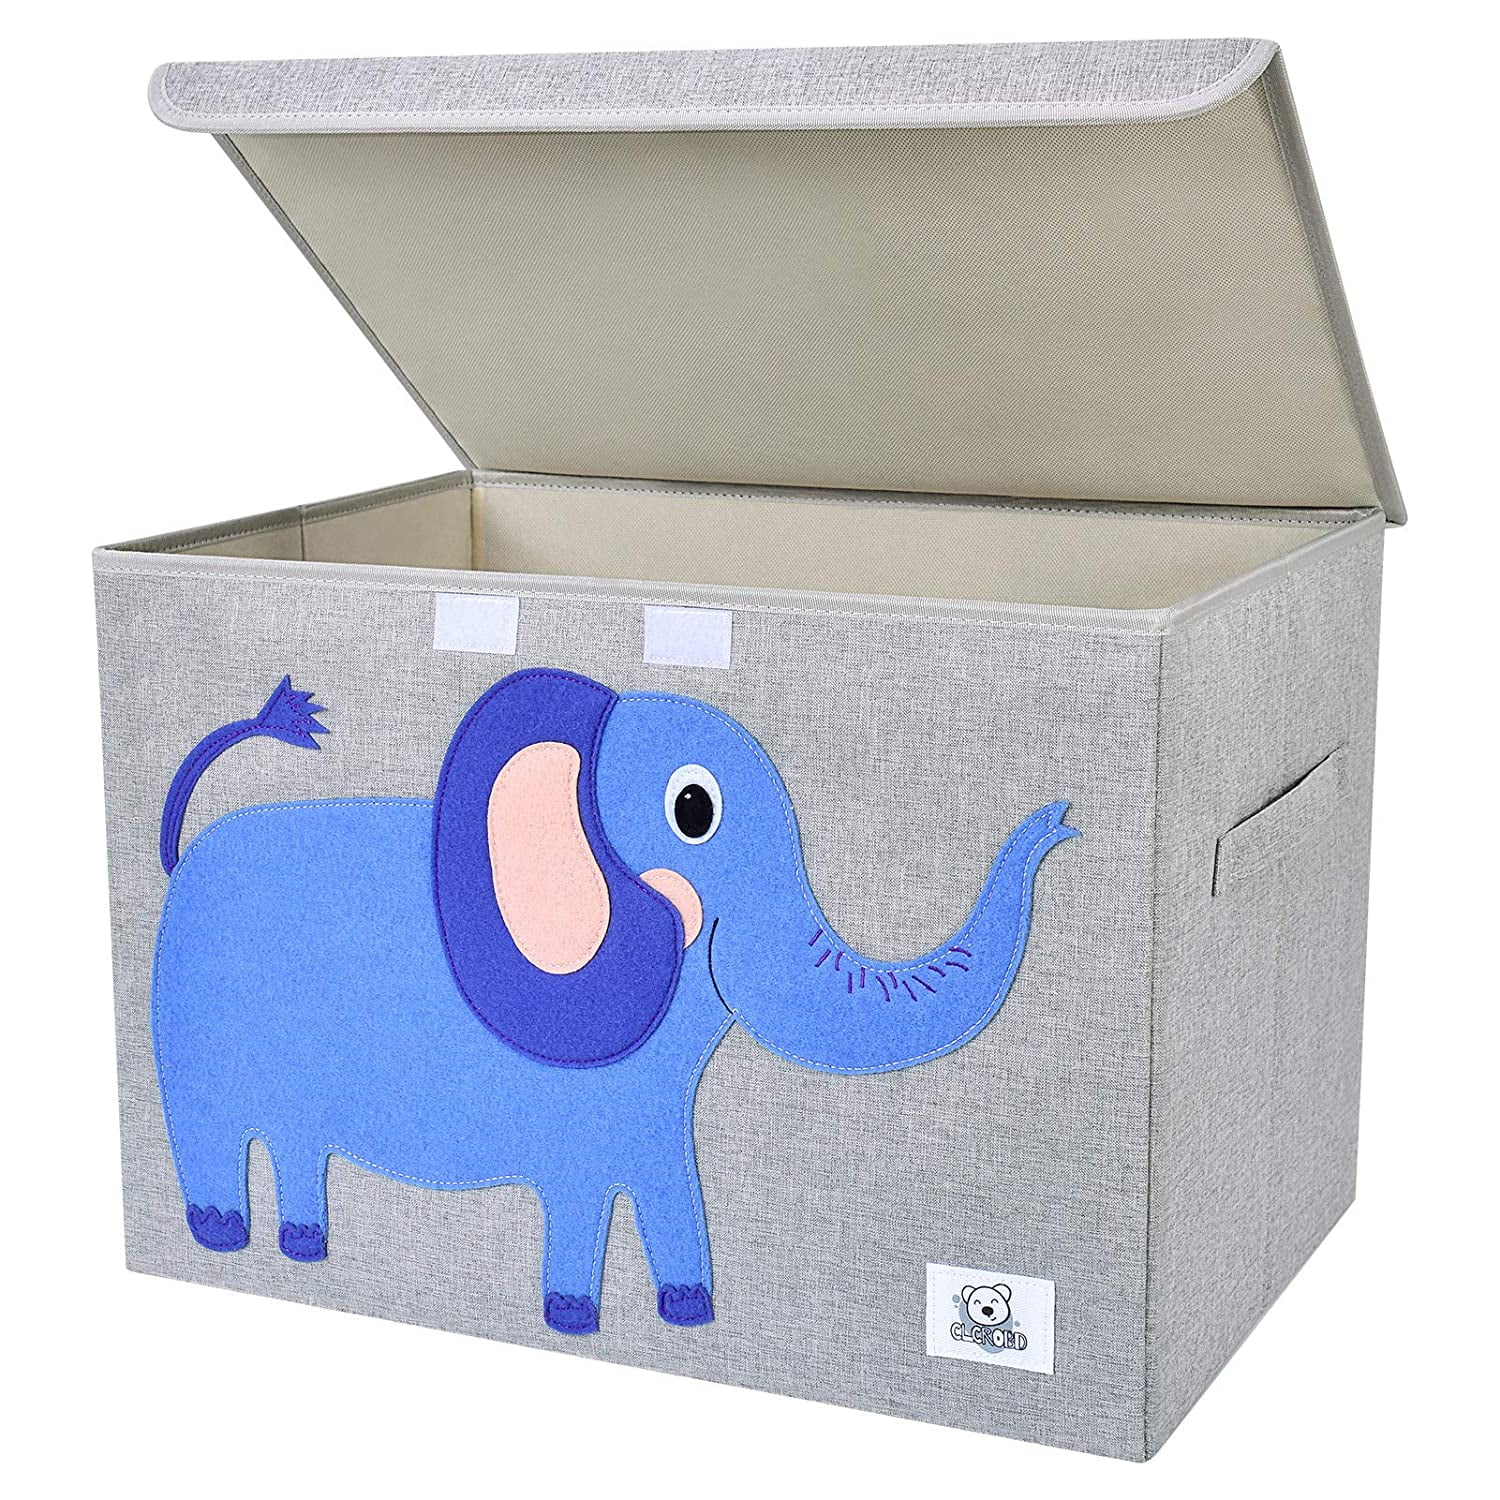 Elephant Lightweight Collapsible Sturdy Toy Storage with Flip-Top Lid and Handles – Fabric Toy Chest/Bin/Basket/Trunk/Organizer for Toddler Children and Baby Nursery Playroom Kids Toy Box – Large 